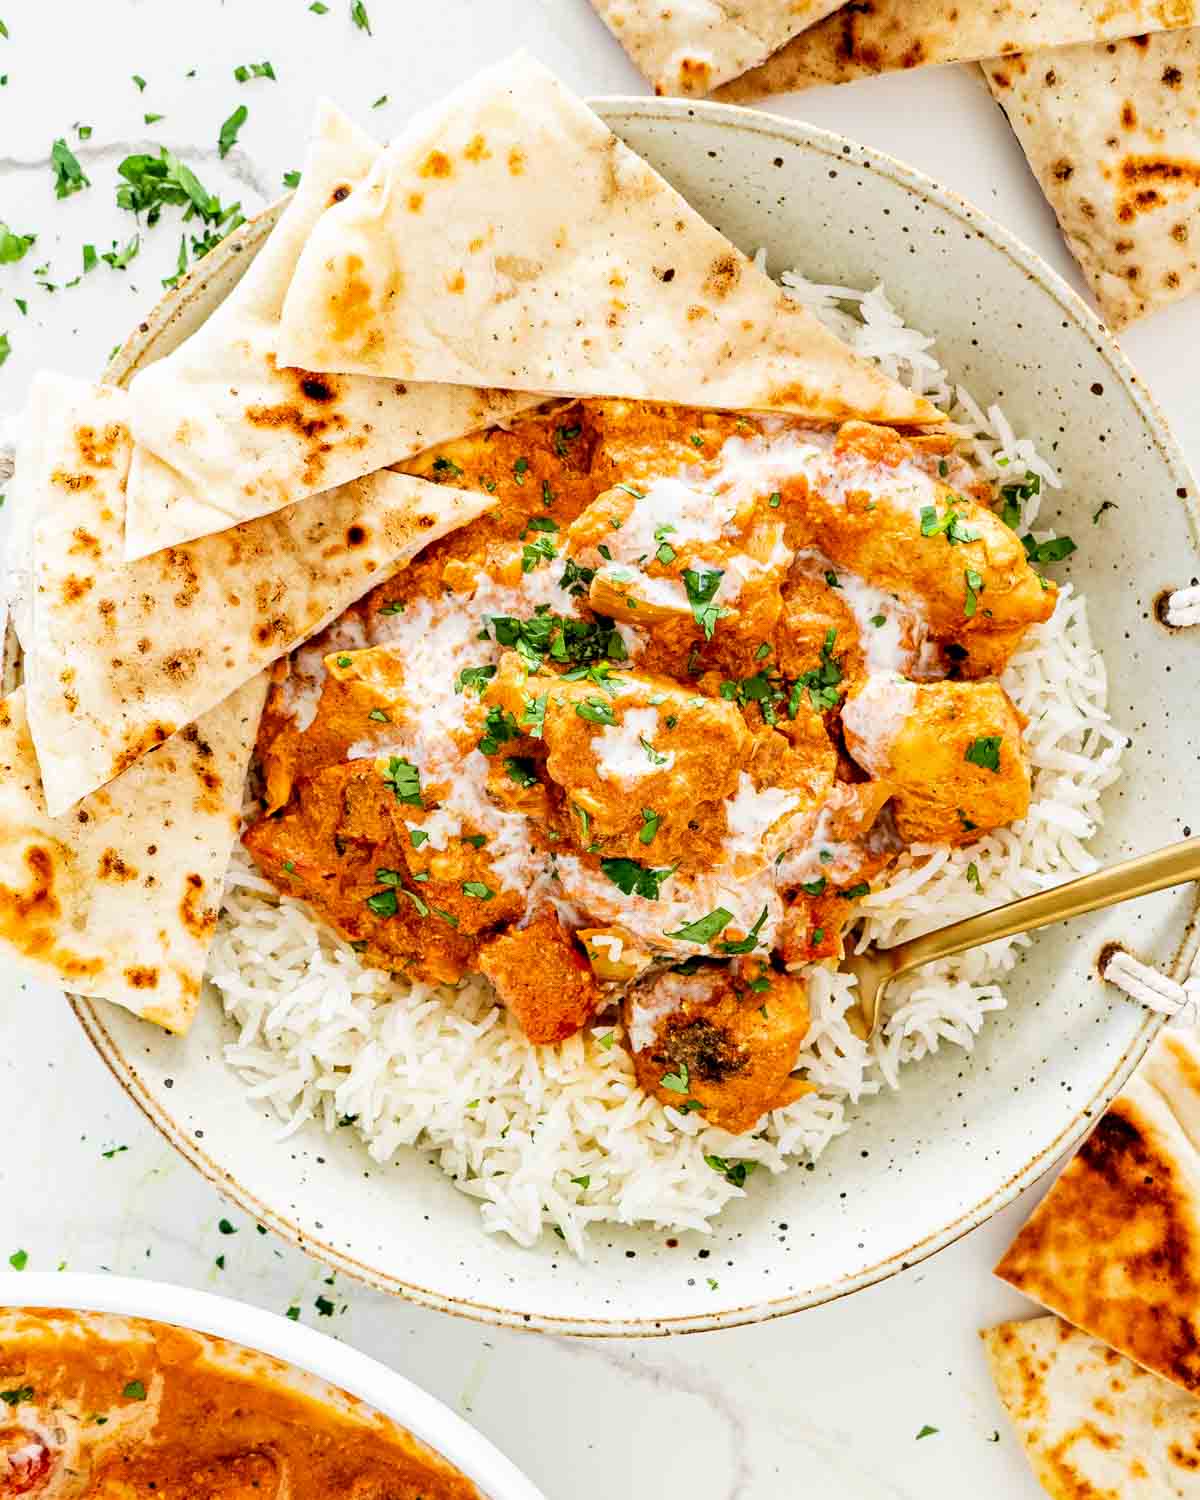 chicken tikka masala in a plate with rice and garnished with cilantro.